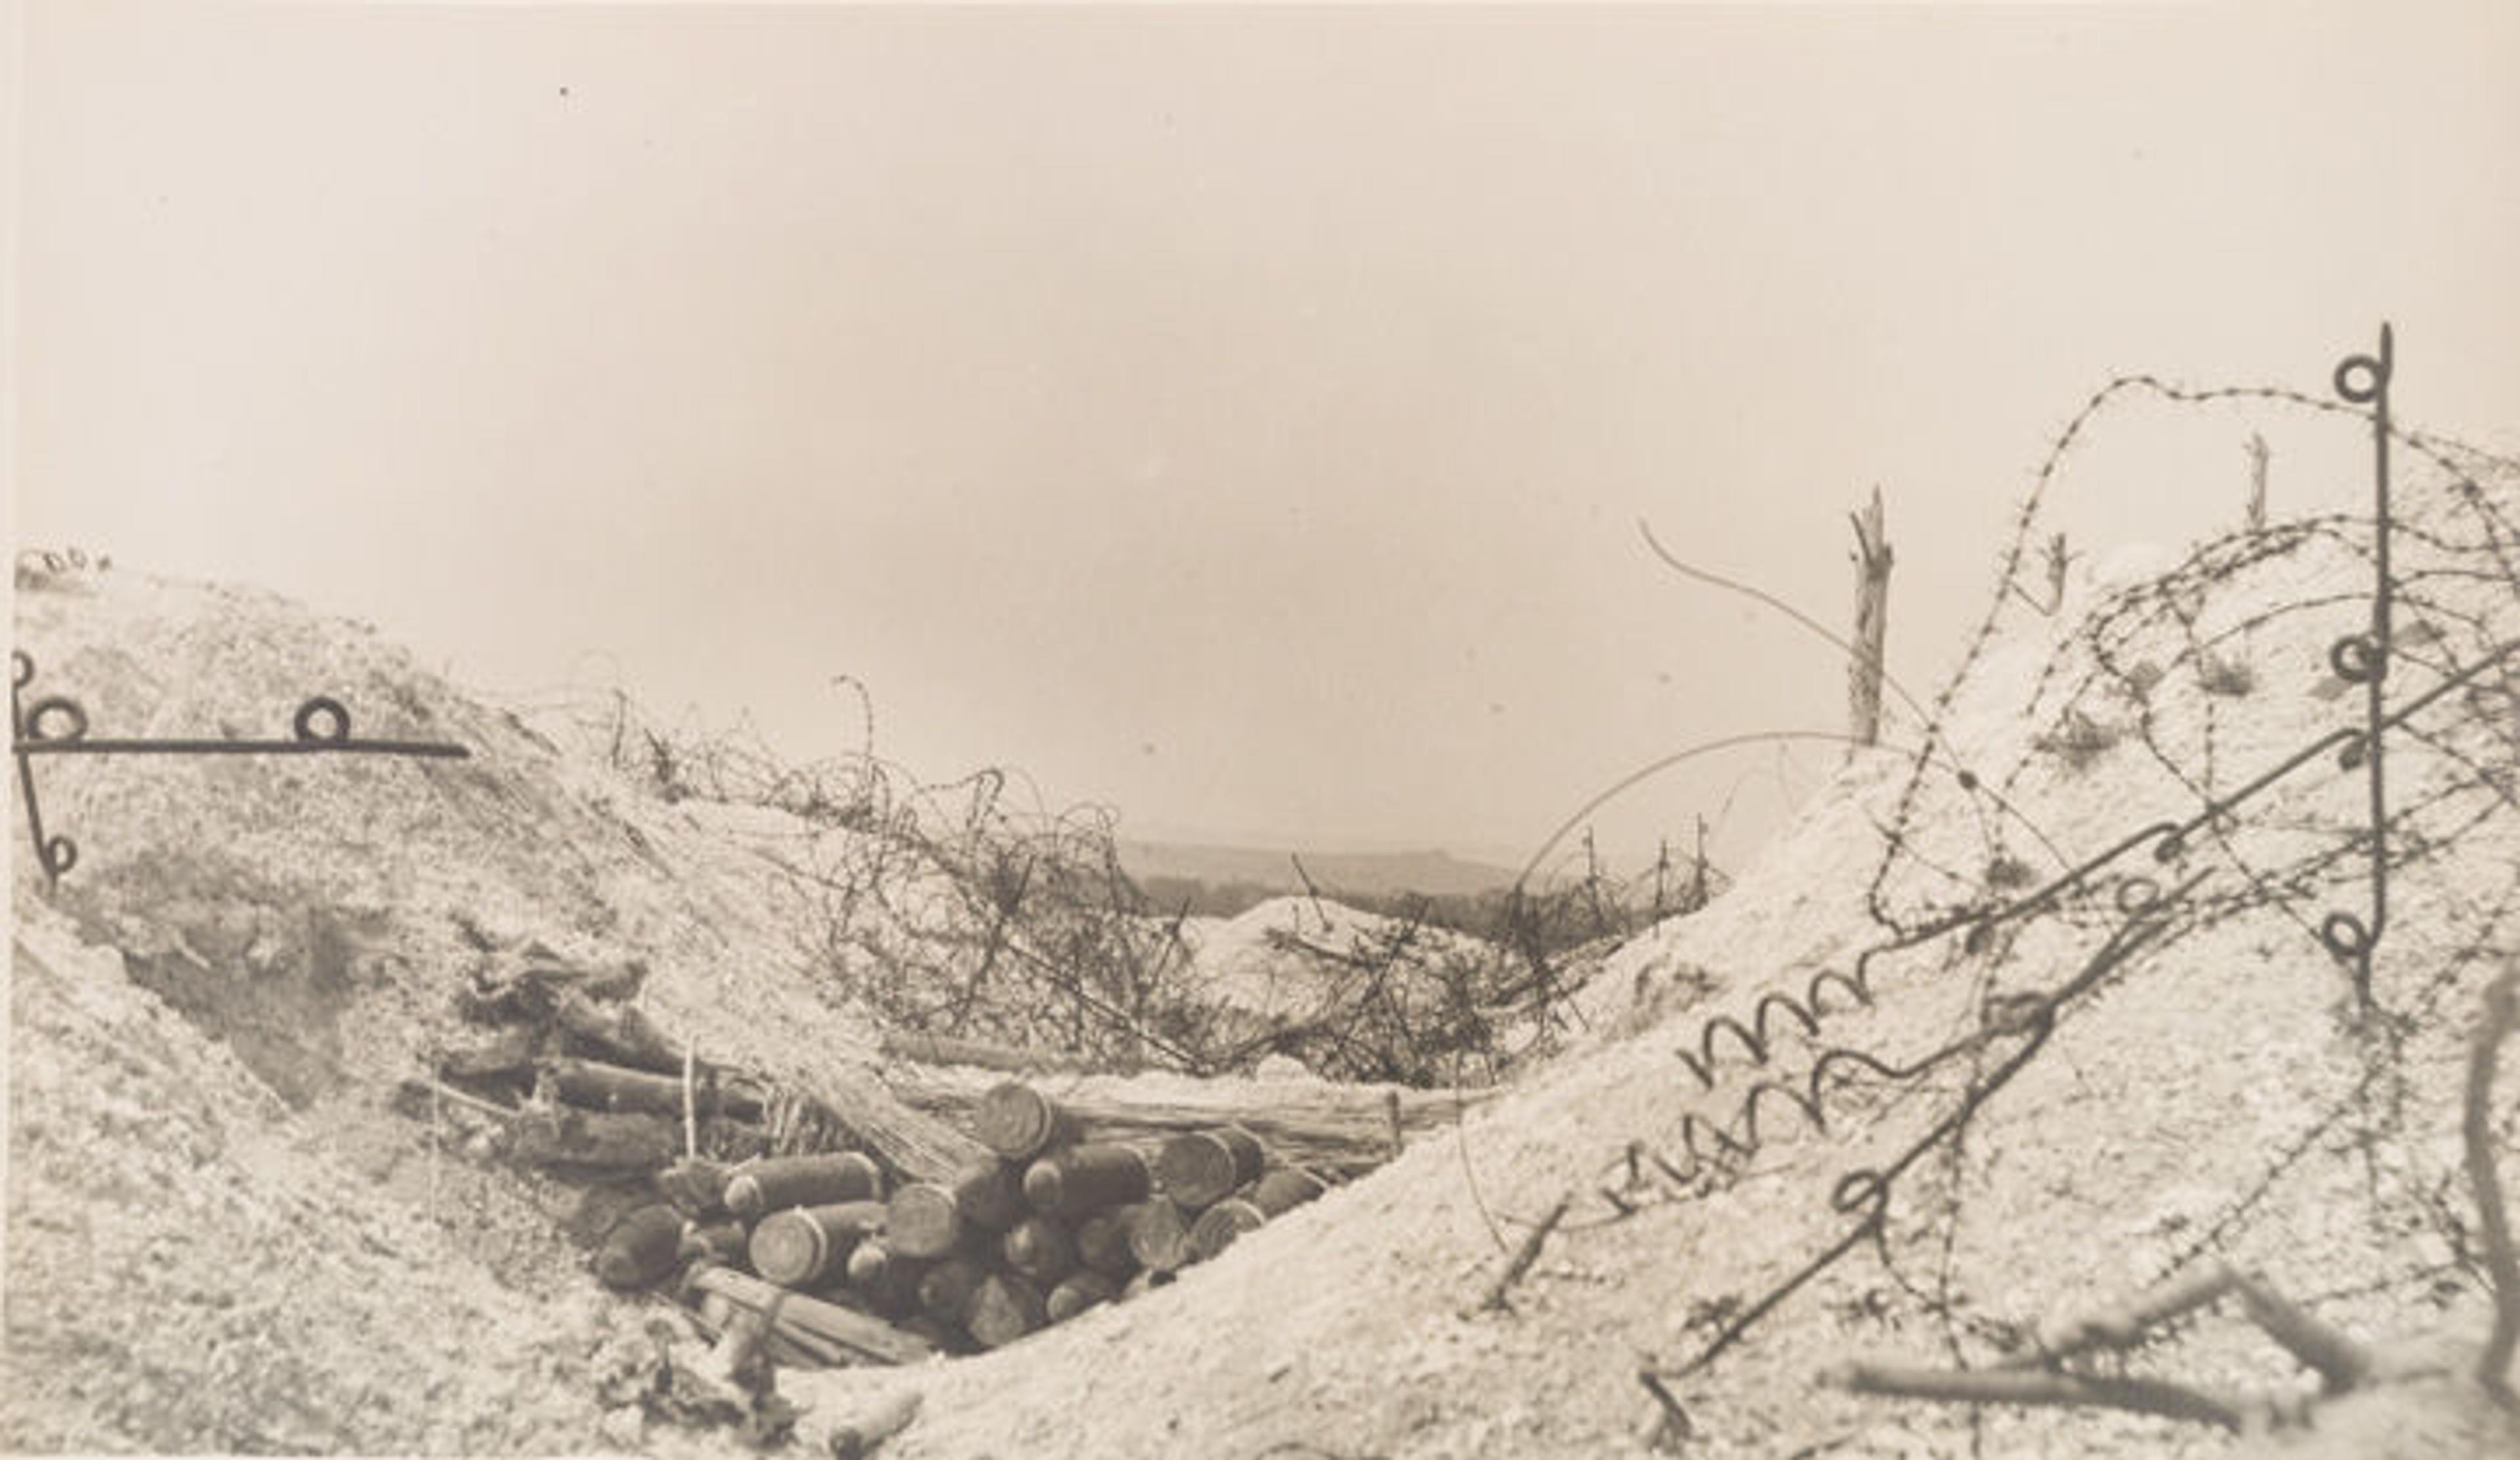 Photo by Margaret Hall of a French battlefield marked with barbed wire and trenches